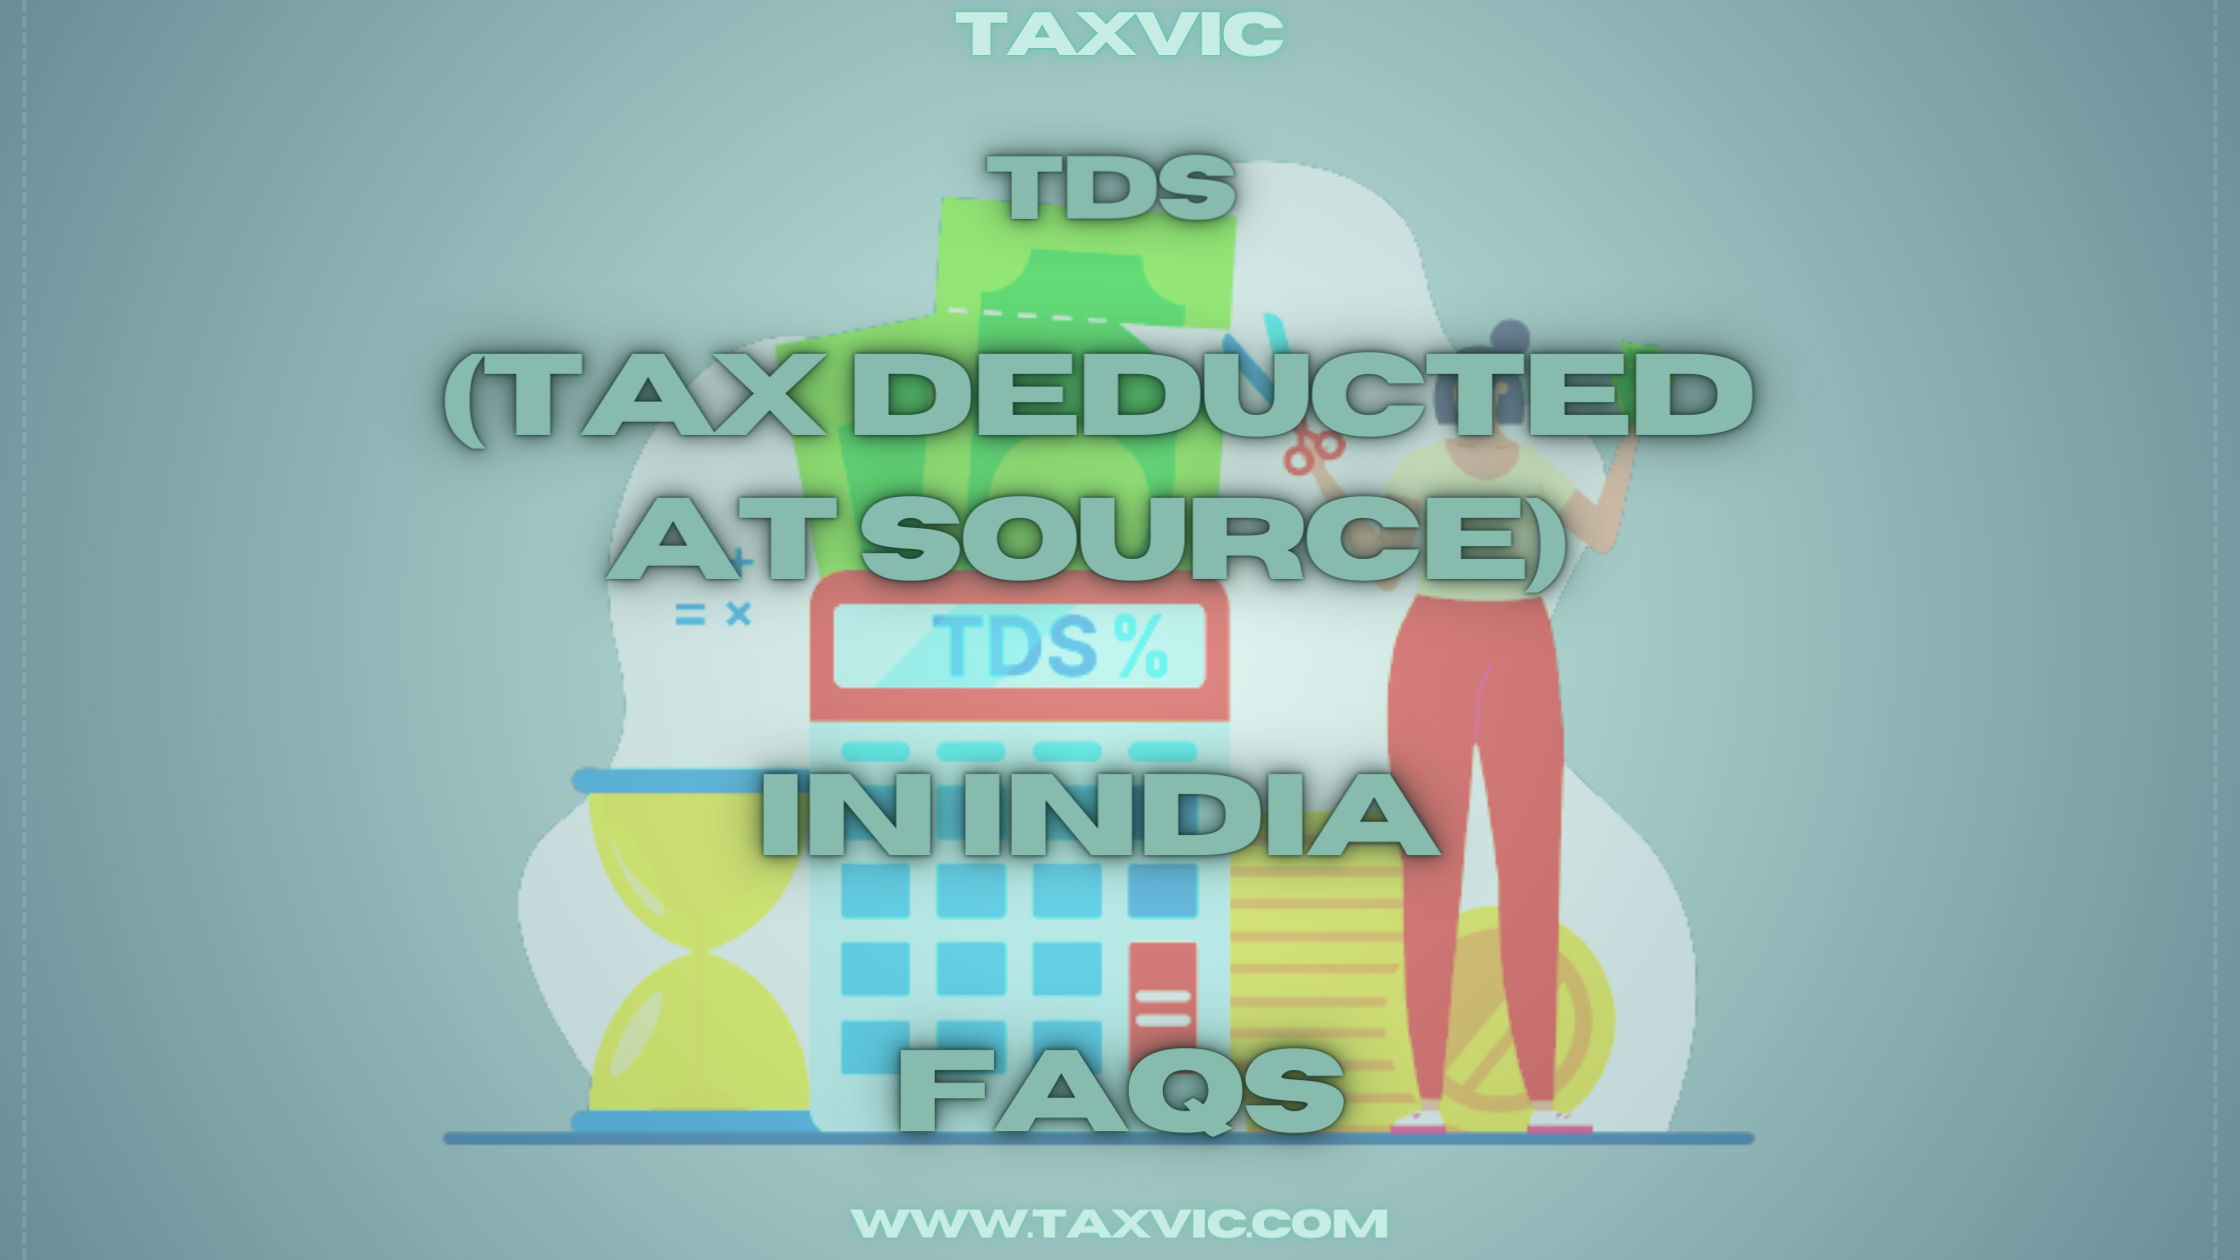 Demystifying TDS (Tax Deducted at Source) in India